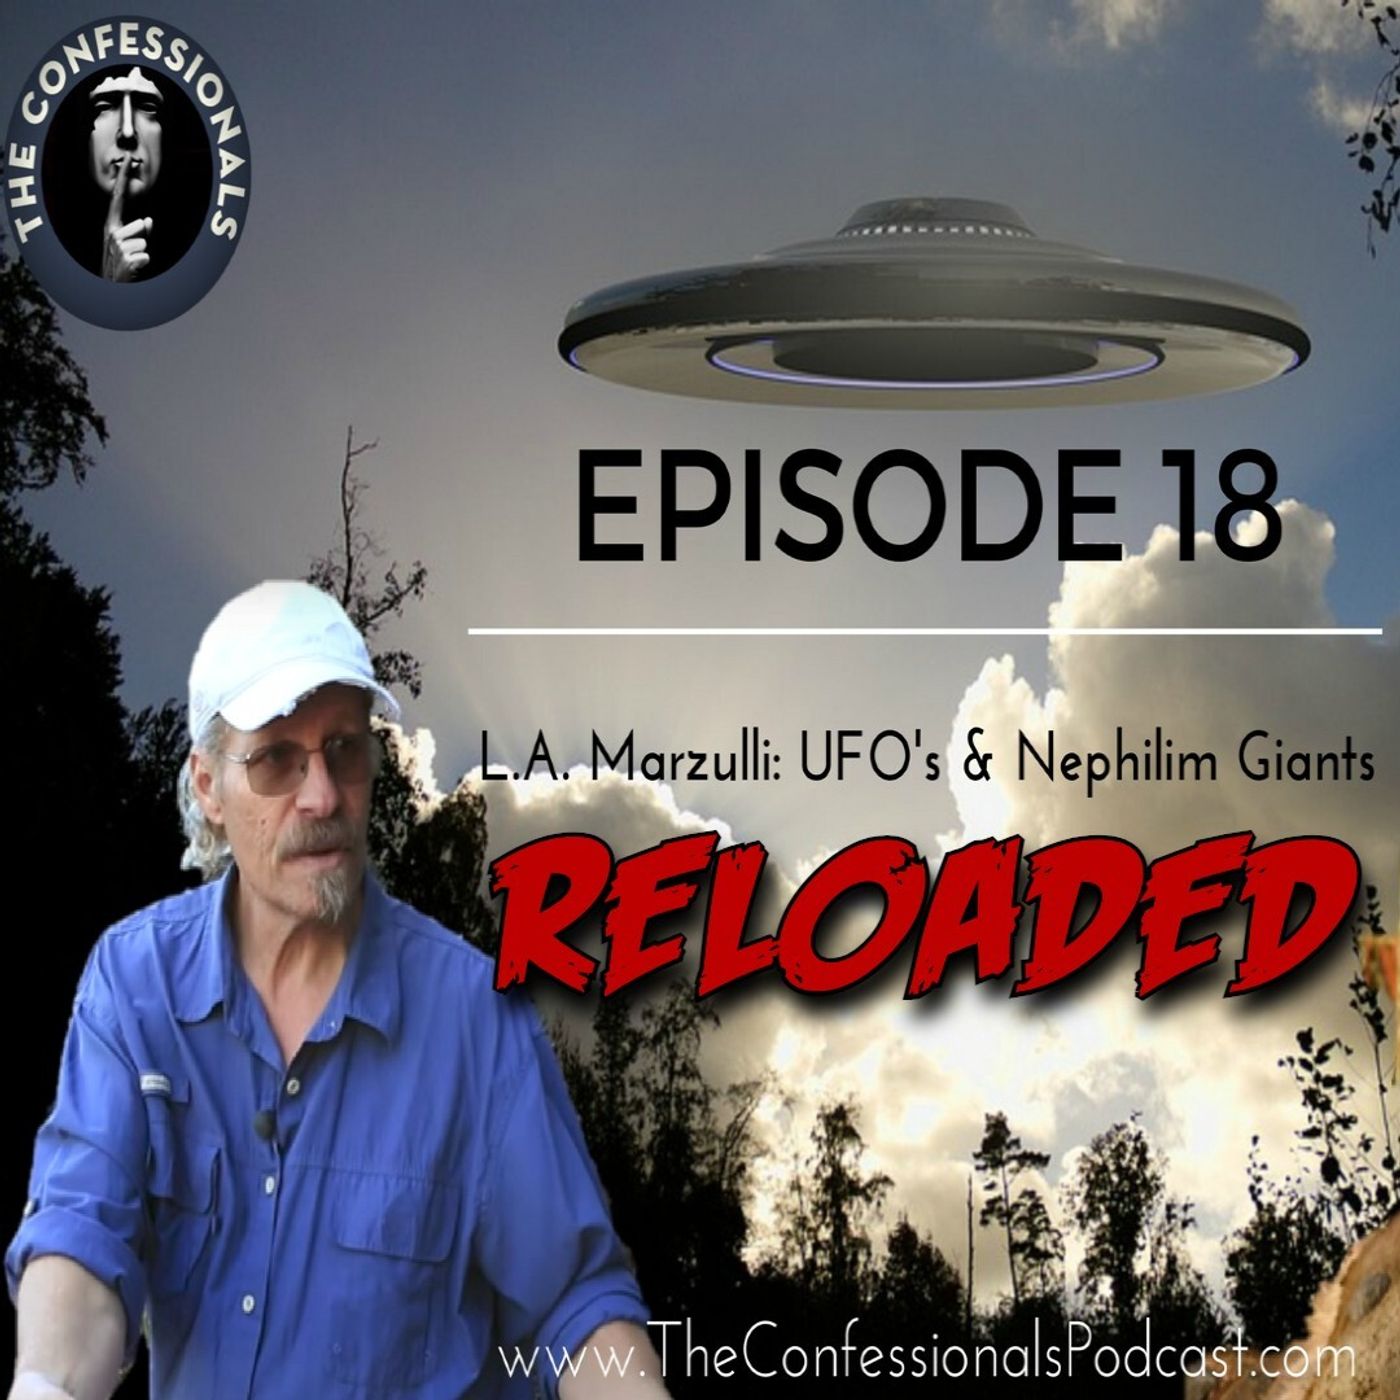 RELOADED | 18: L.A. Marzulli: UFOs & Nephilim Giants